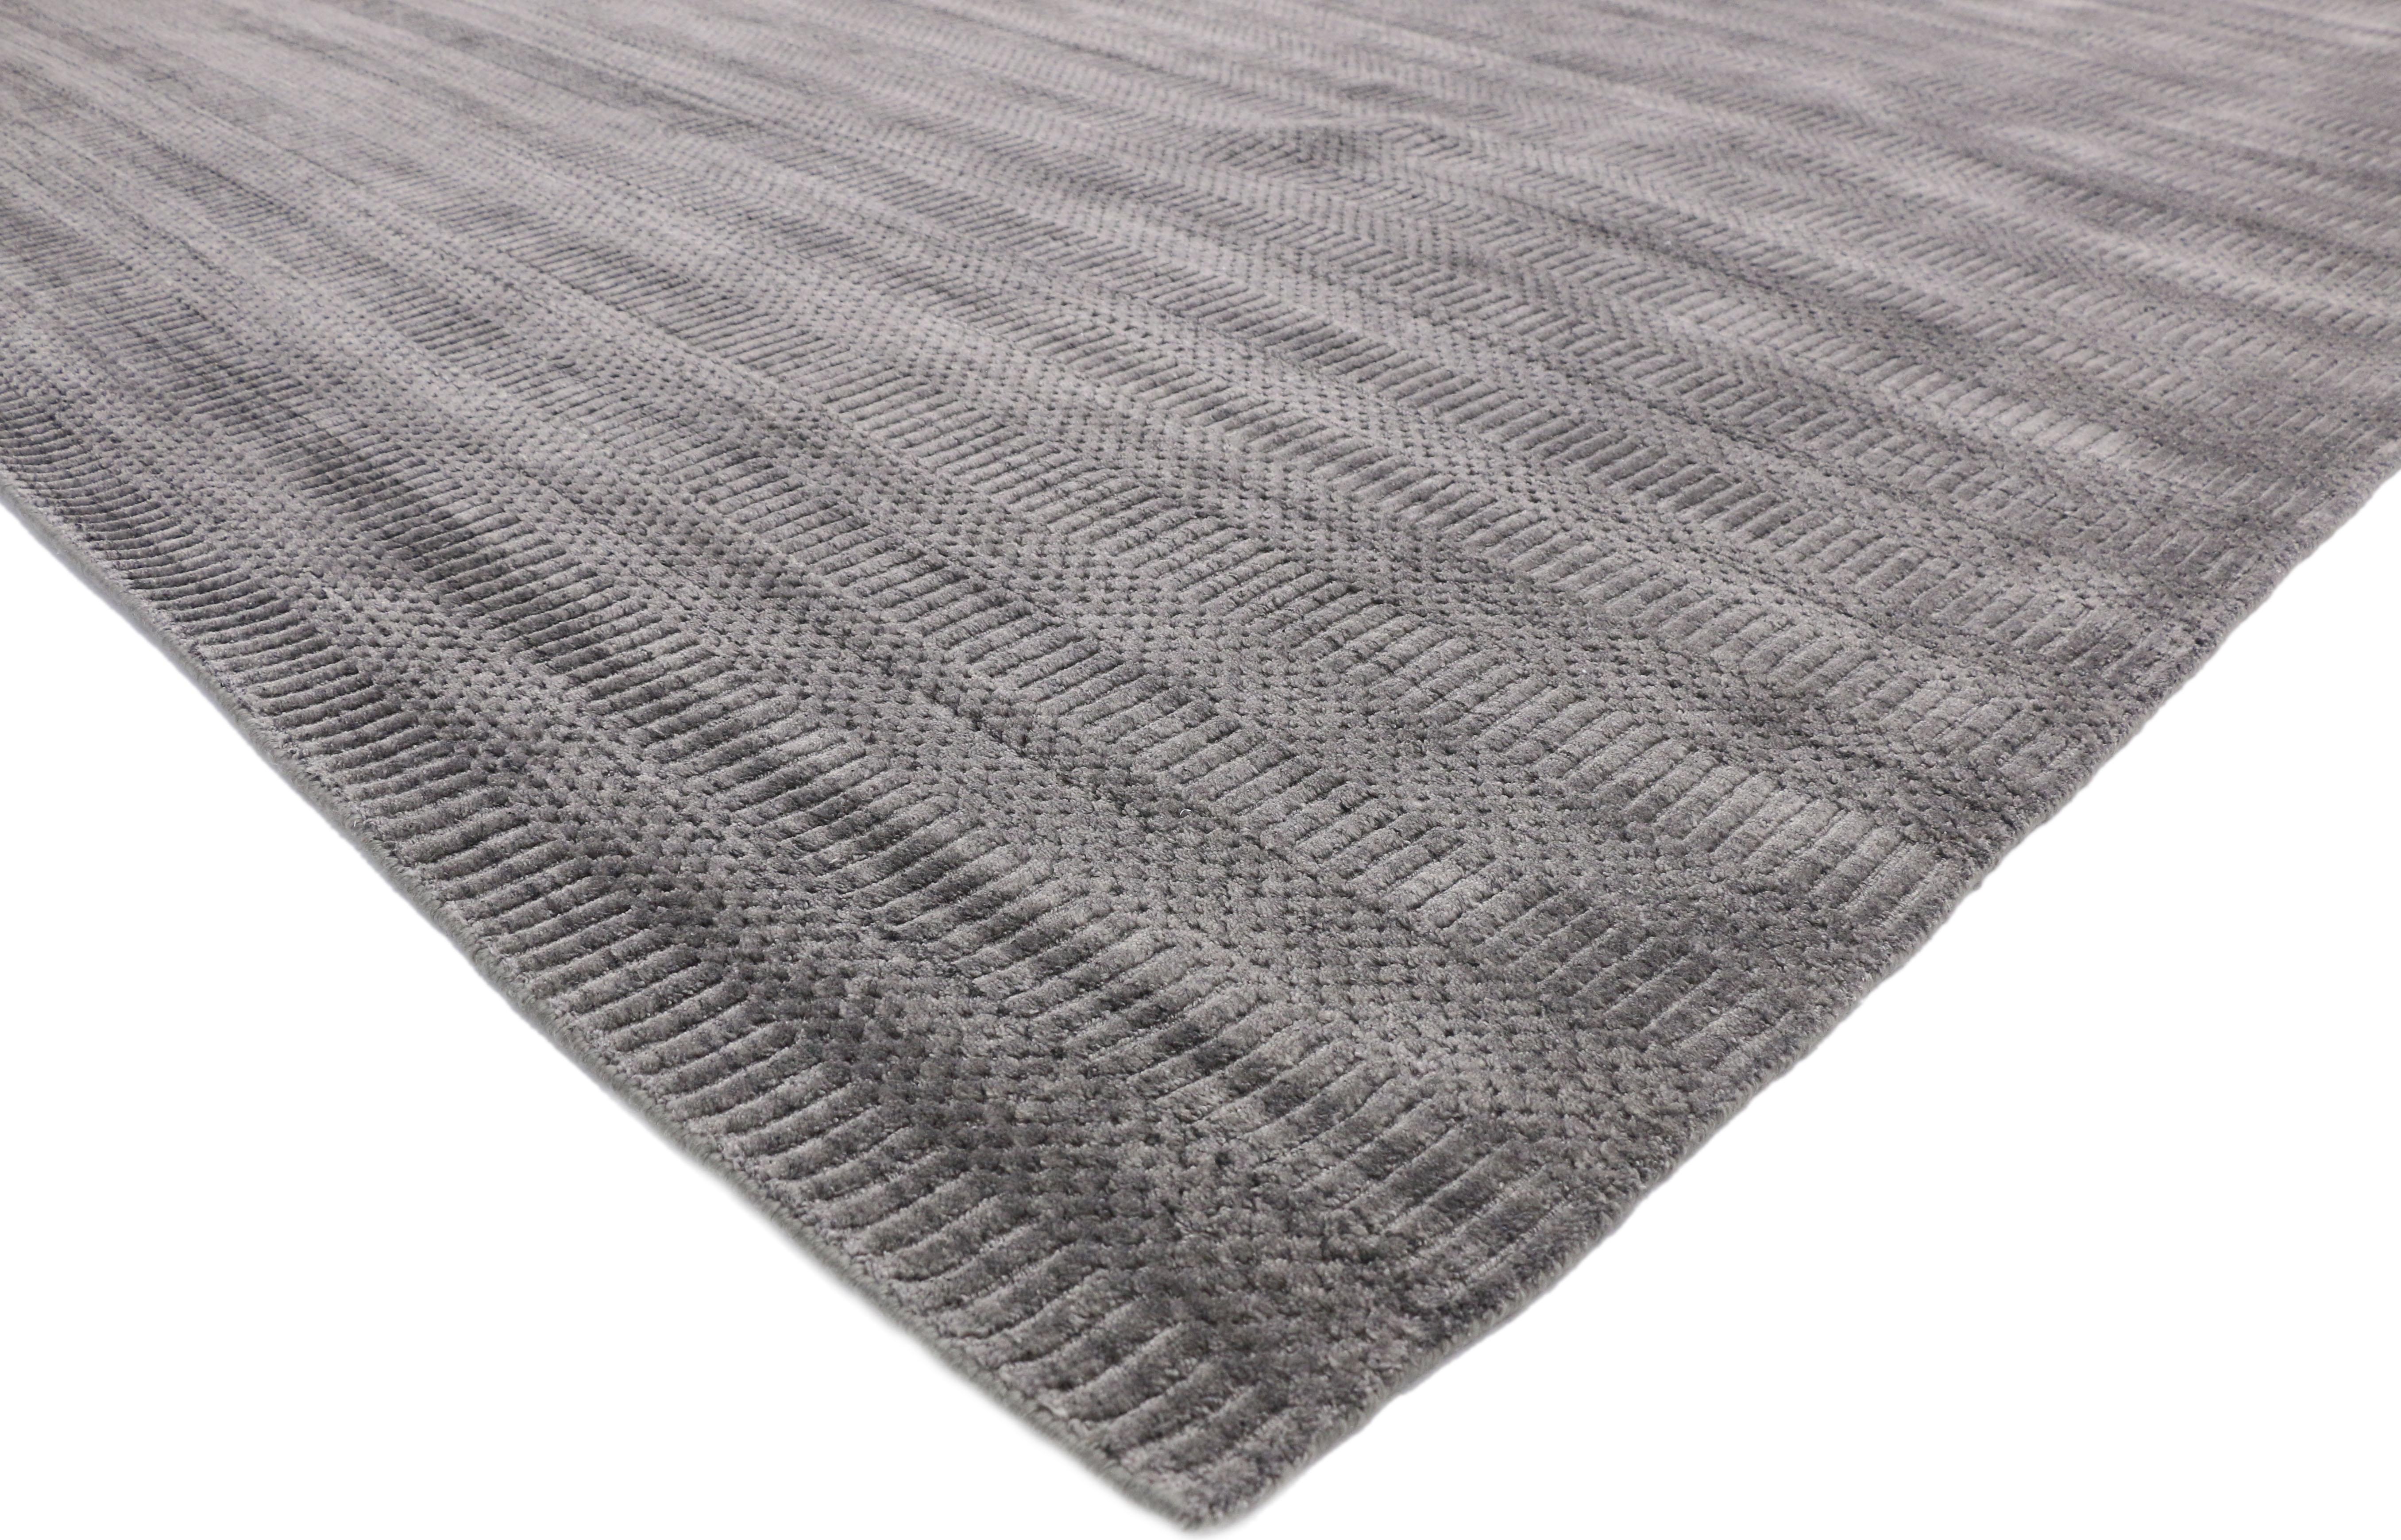 30437, transitional Nordic gray area rug with modern Scandinavian style. This gray midcentury style carpet emanates function and versatility with high style. Midcentury vibes meet Scandinavian design in this transitional gray area rug. The all-over